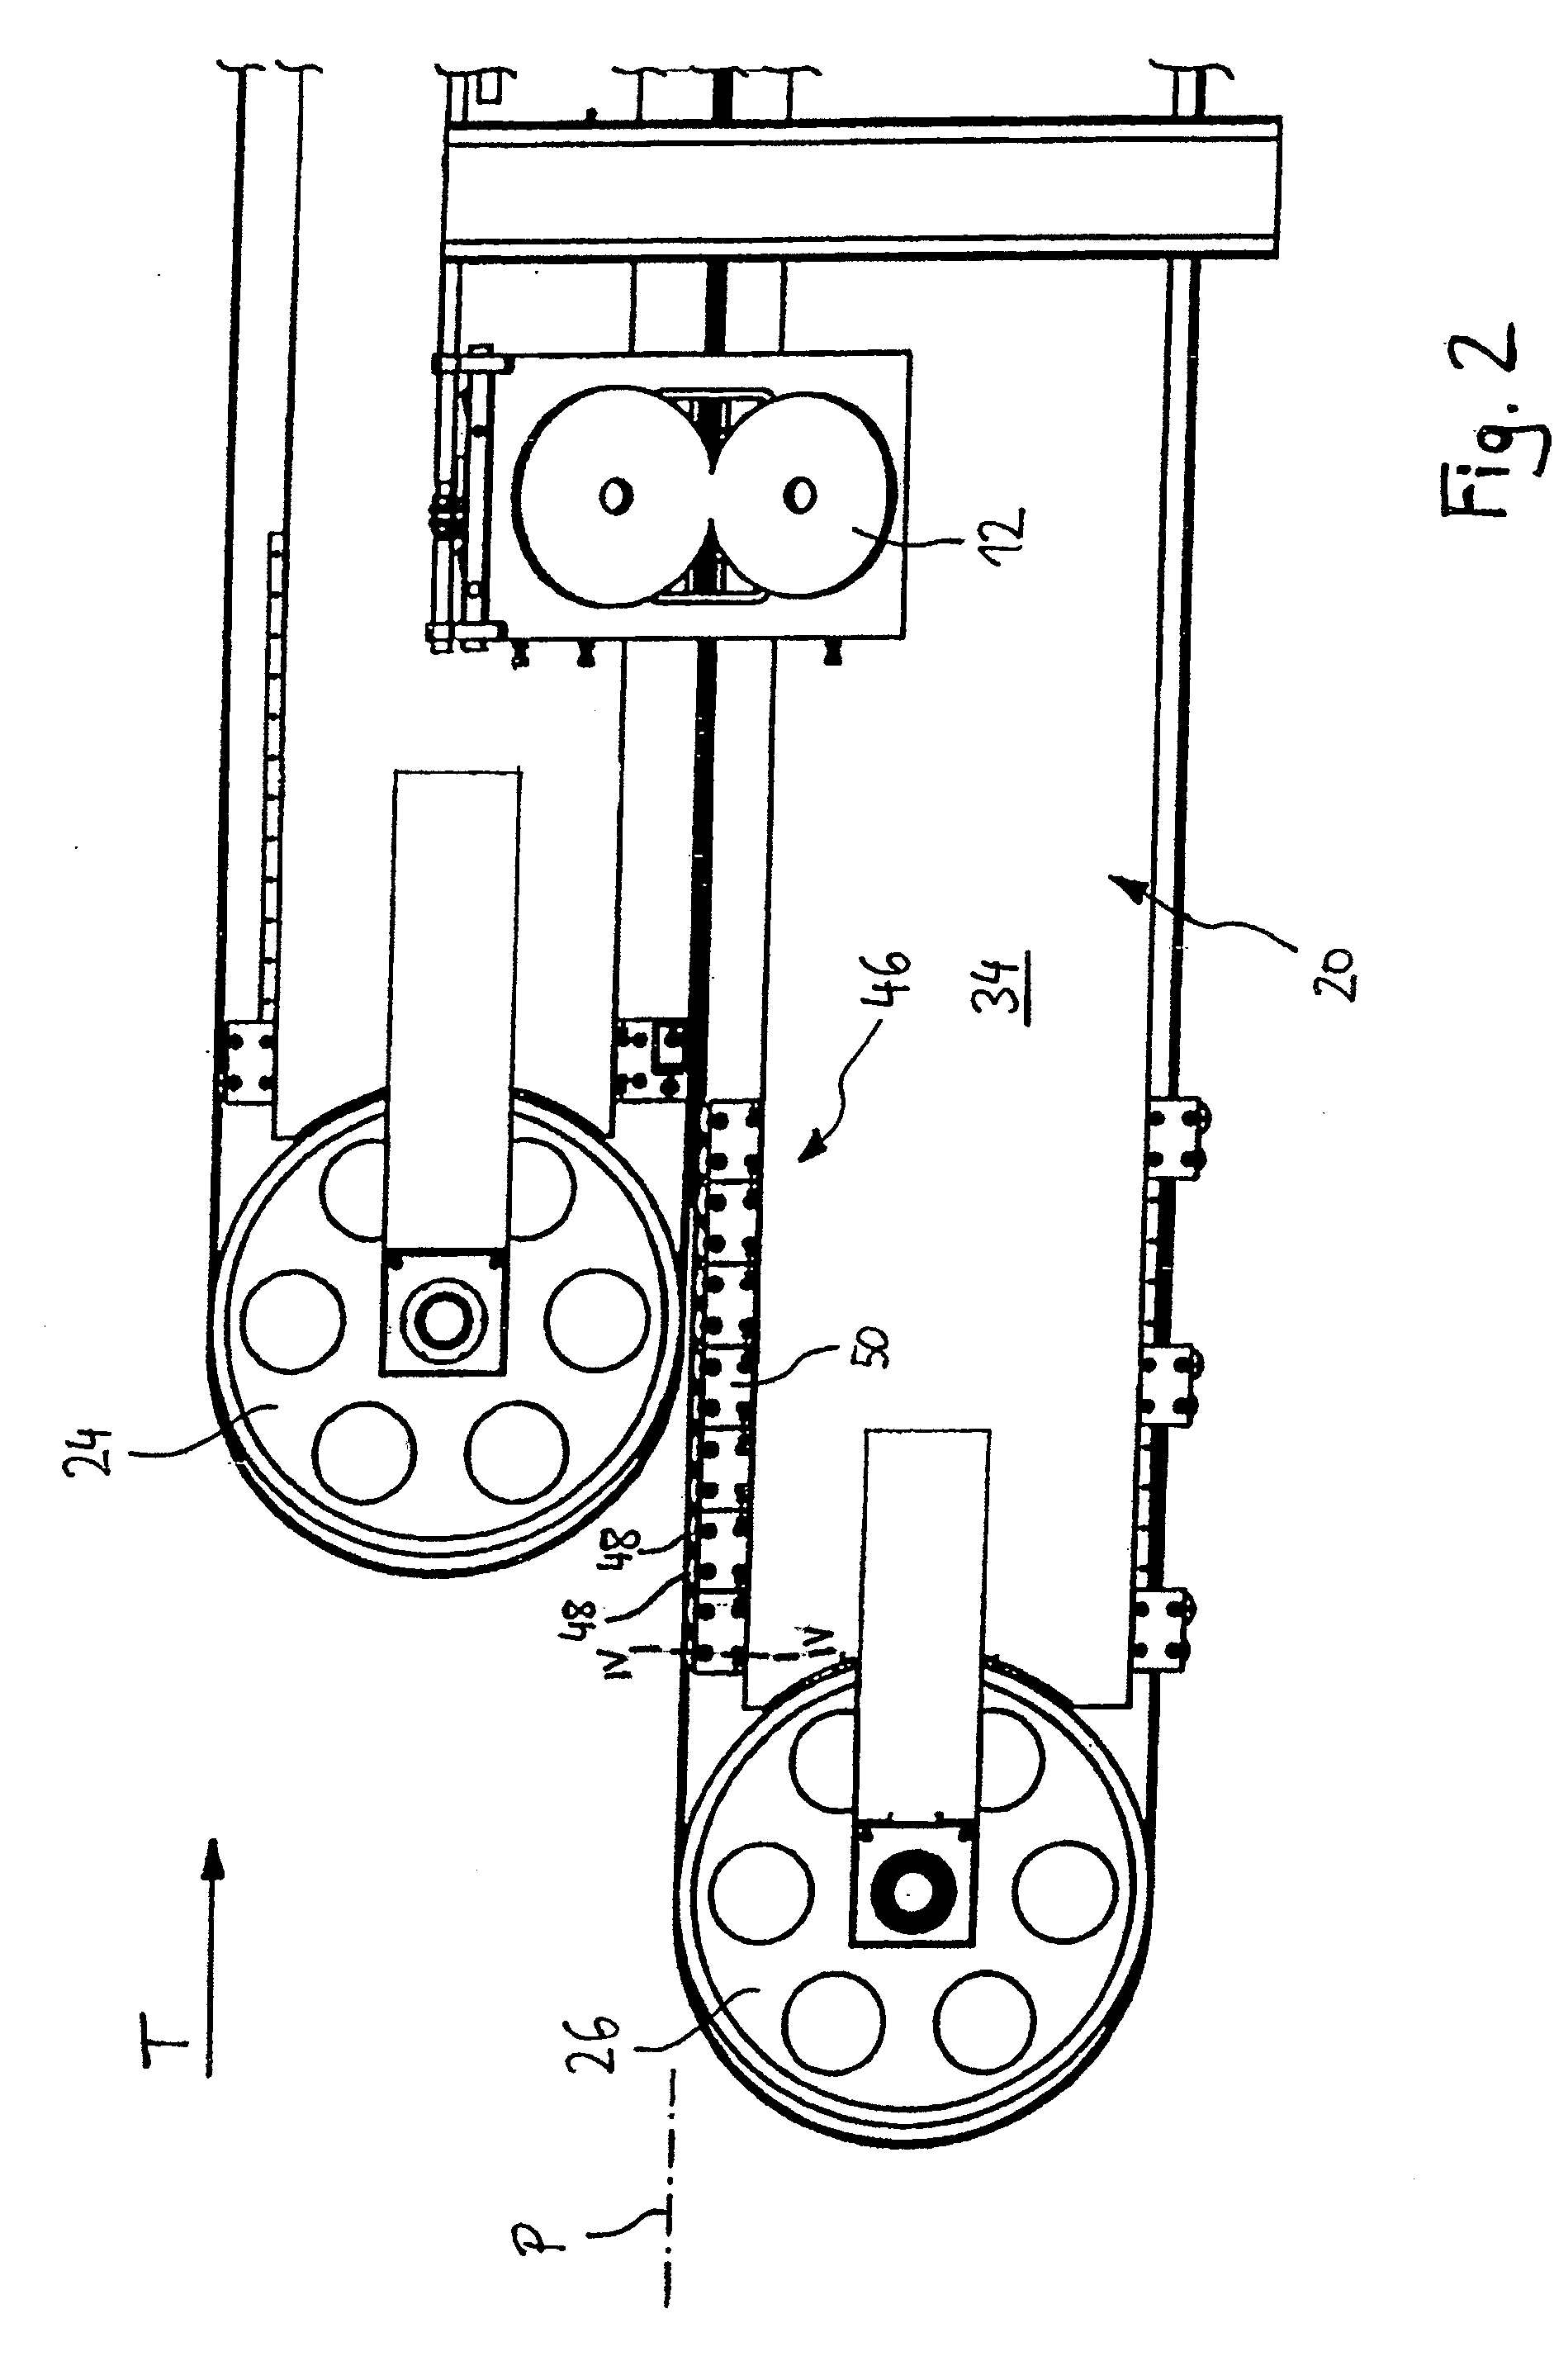 Apparatus for producing and/or processing panels